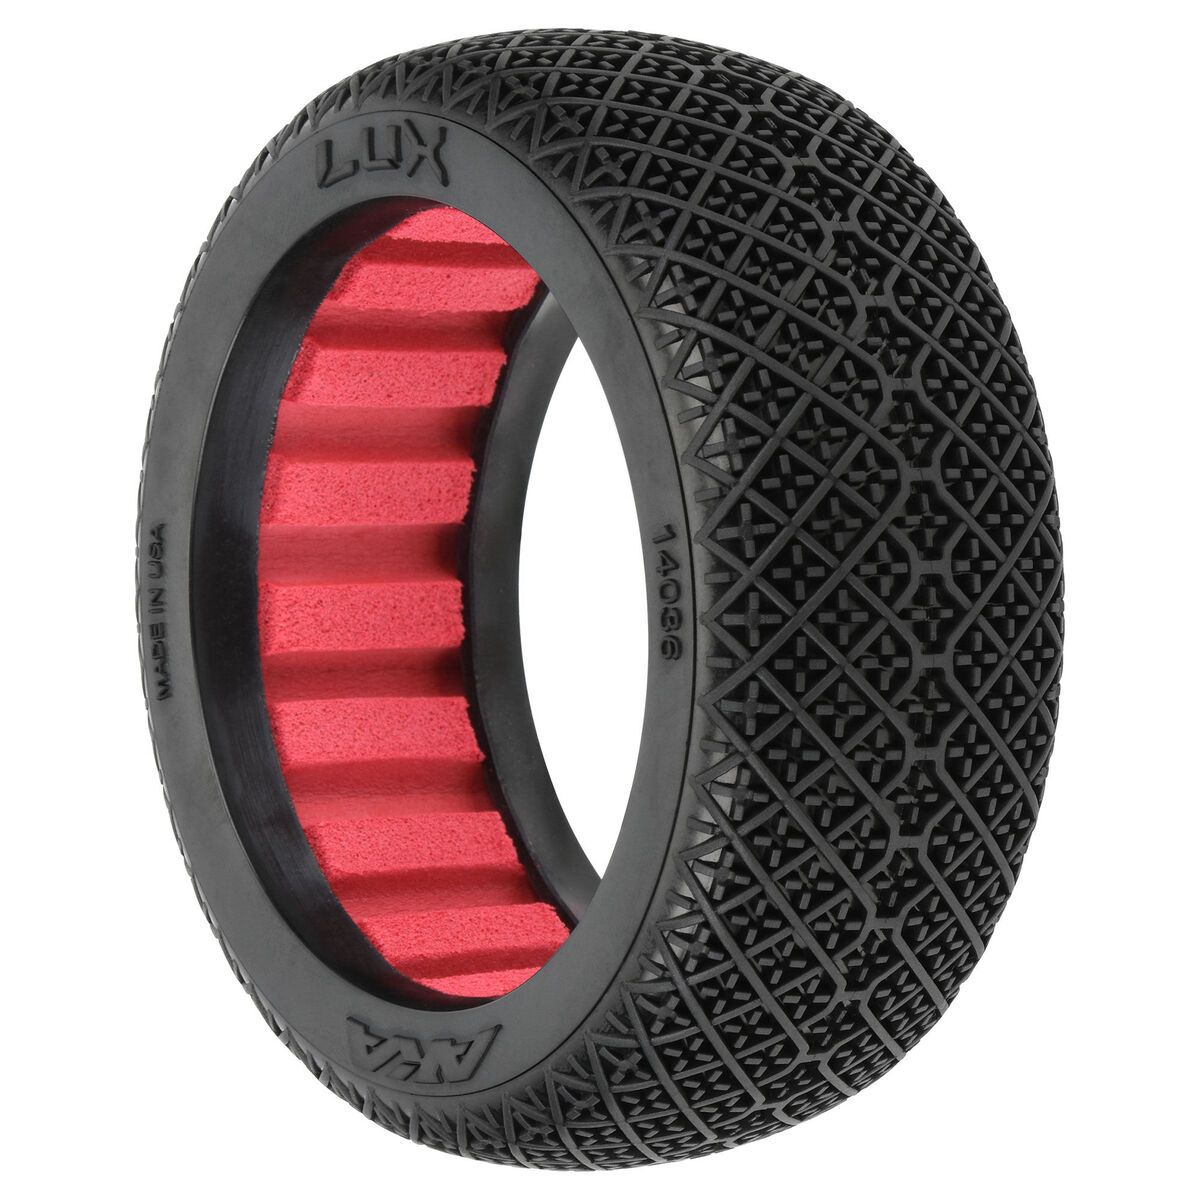 AKA Products, Inc. 14036QR 1:8 Lux Q Front/Rear Off-Road Buggy Tires (Pack of 2)